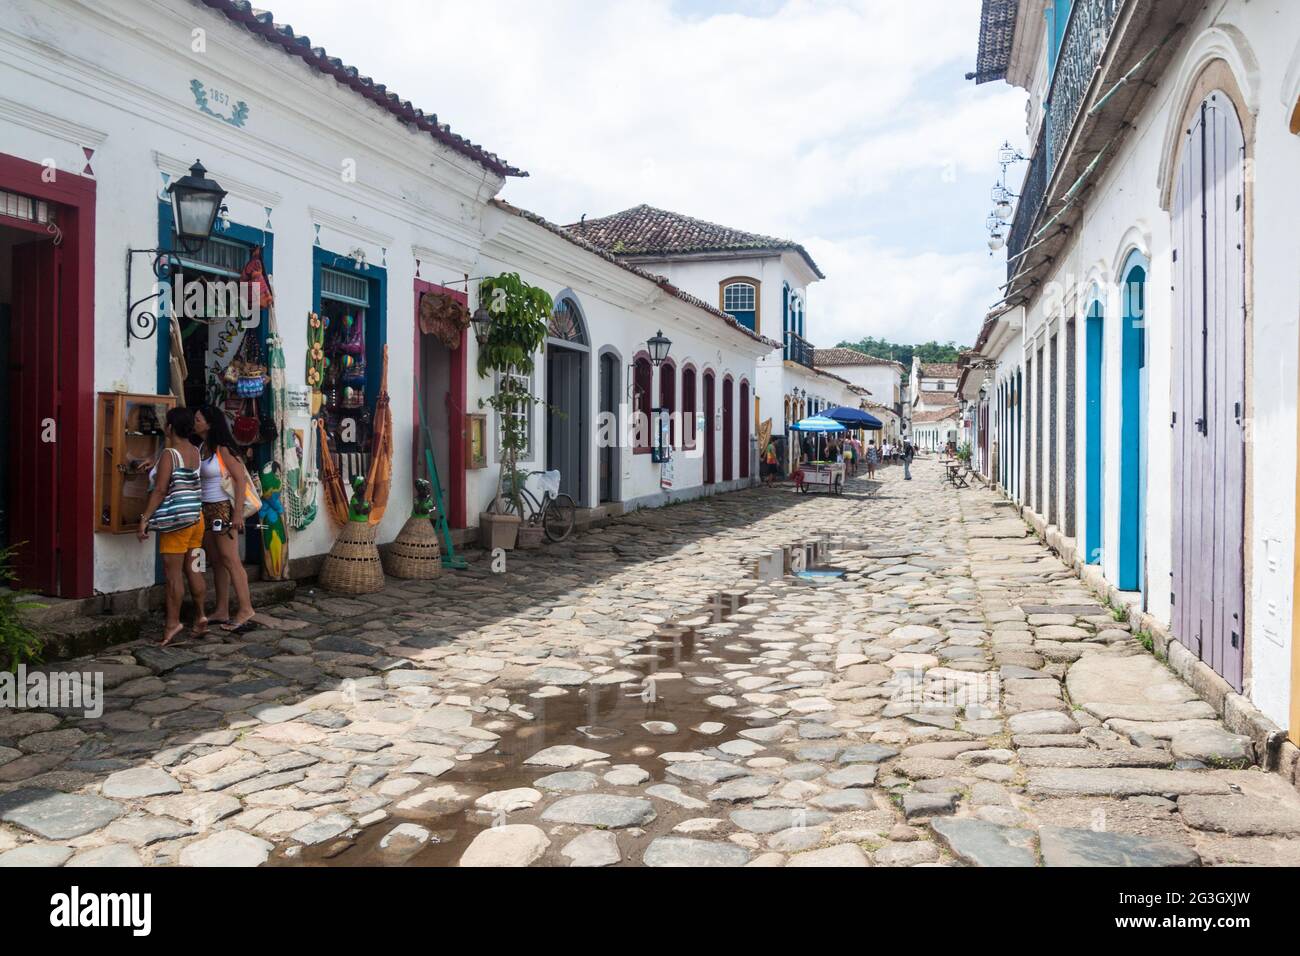 PARATY, BRAZIL - FEBRUARY 1, 2015: People walk in a narrow street an old colonial town Paraty, Brazil Stock Photo